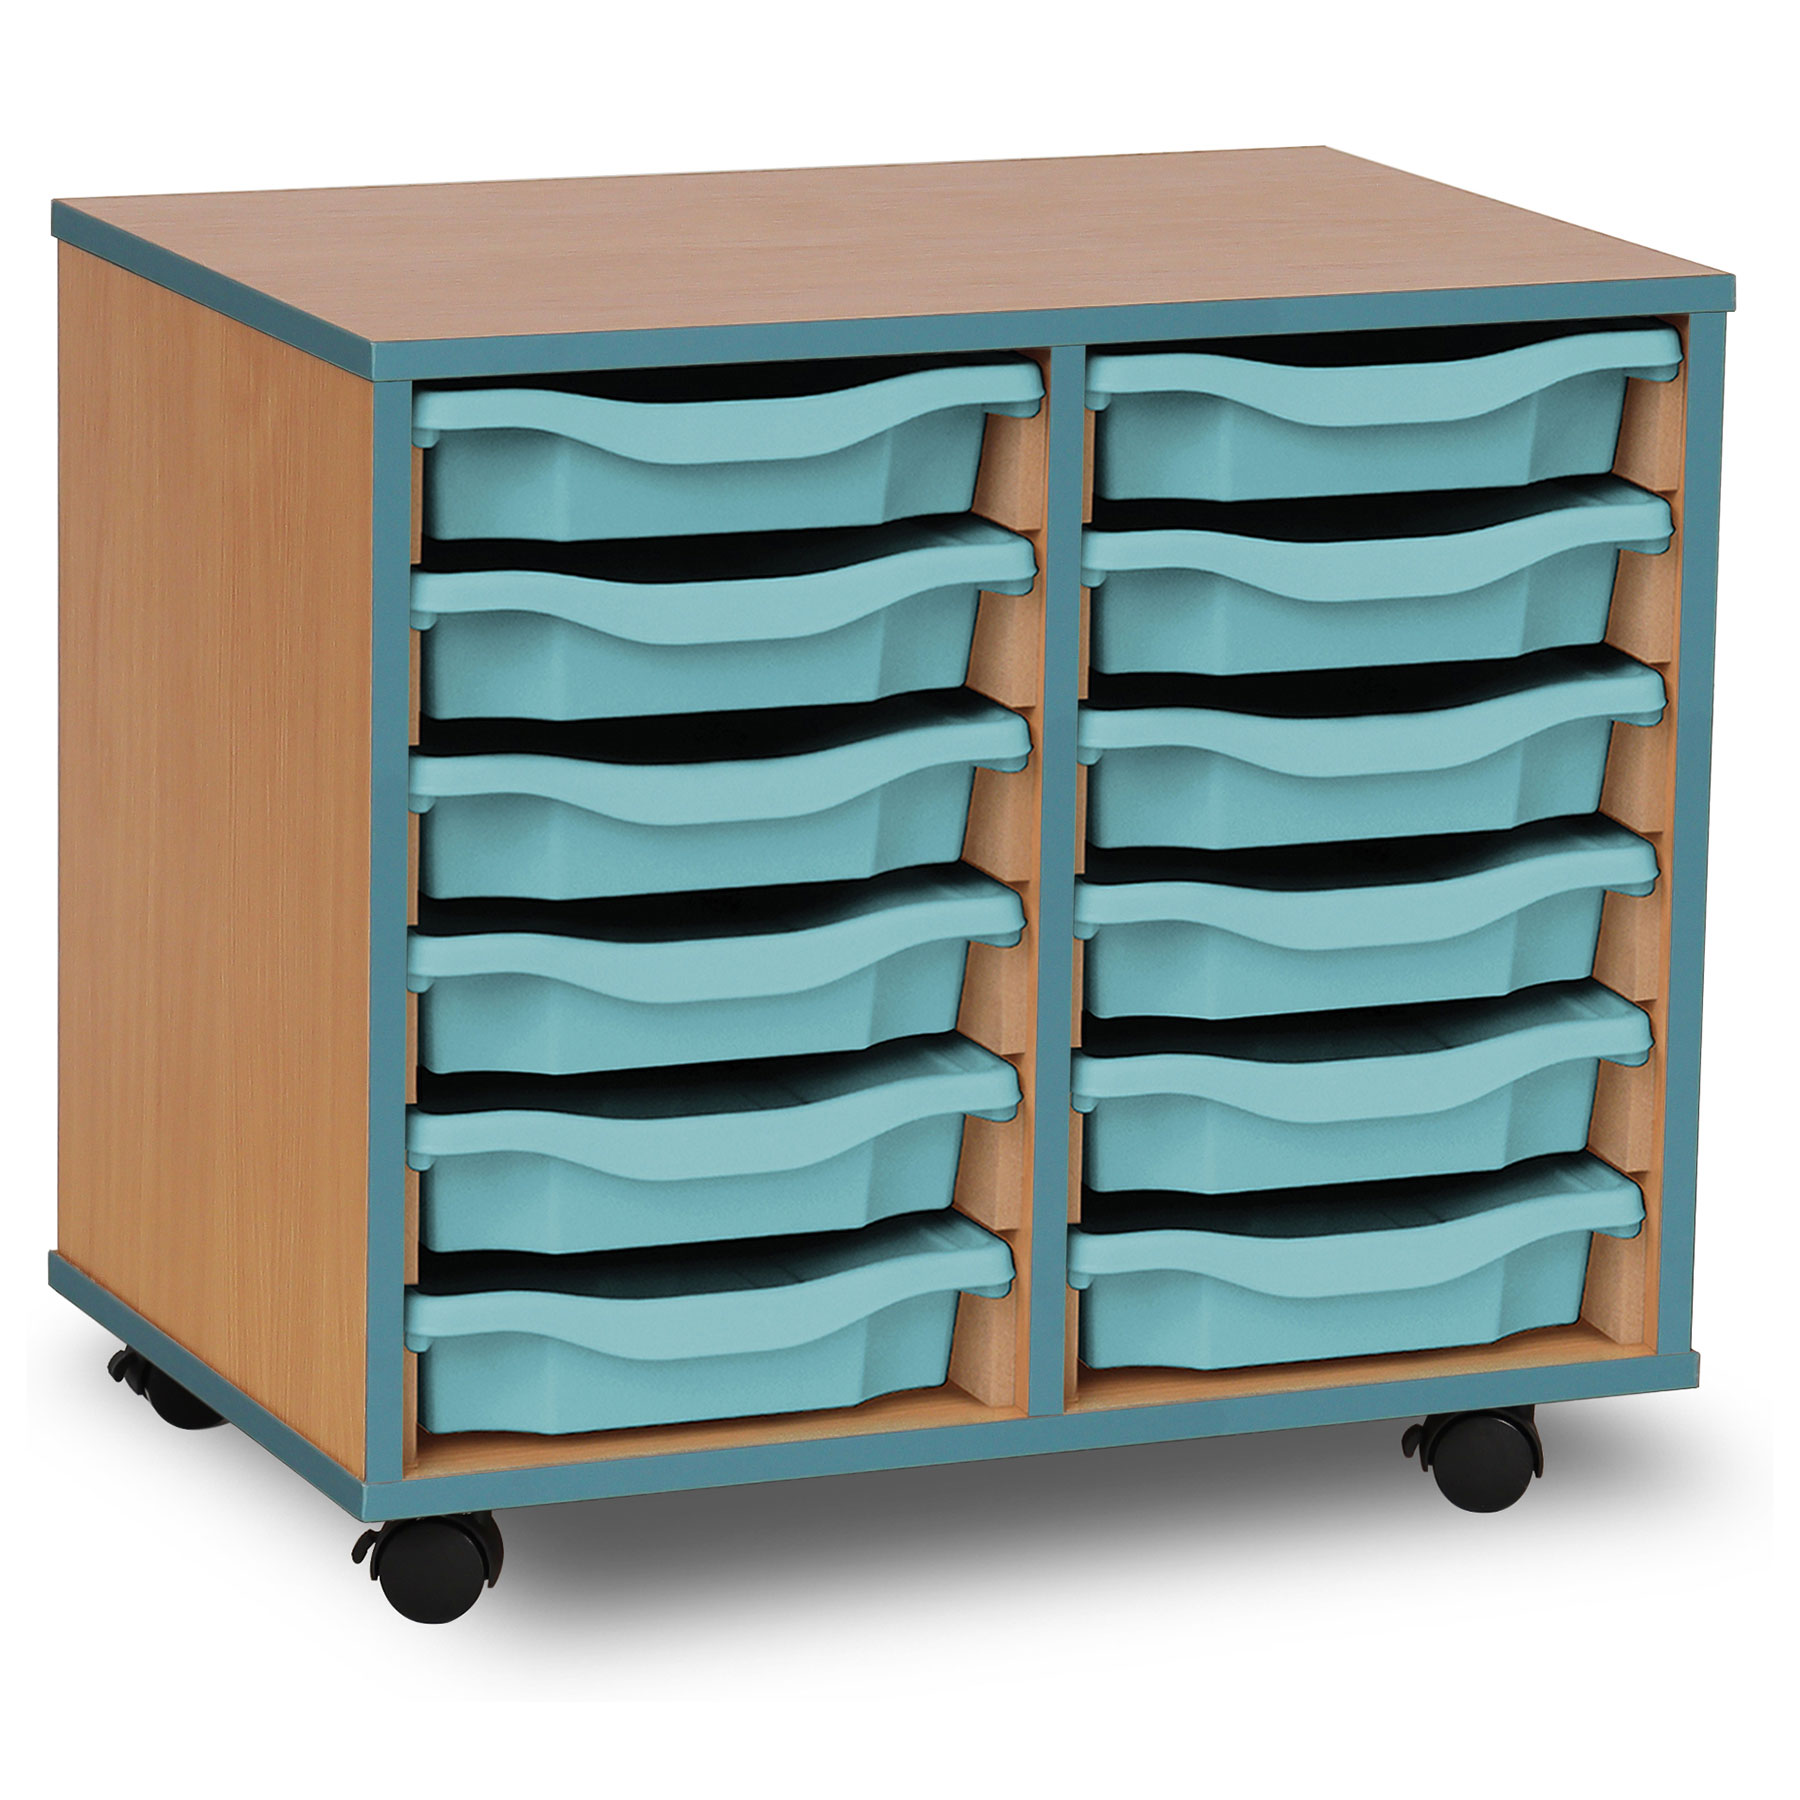 12 Single Tray Unit with Metal Blue Edging, Castors & Metal Blue Trays